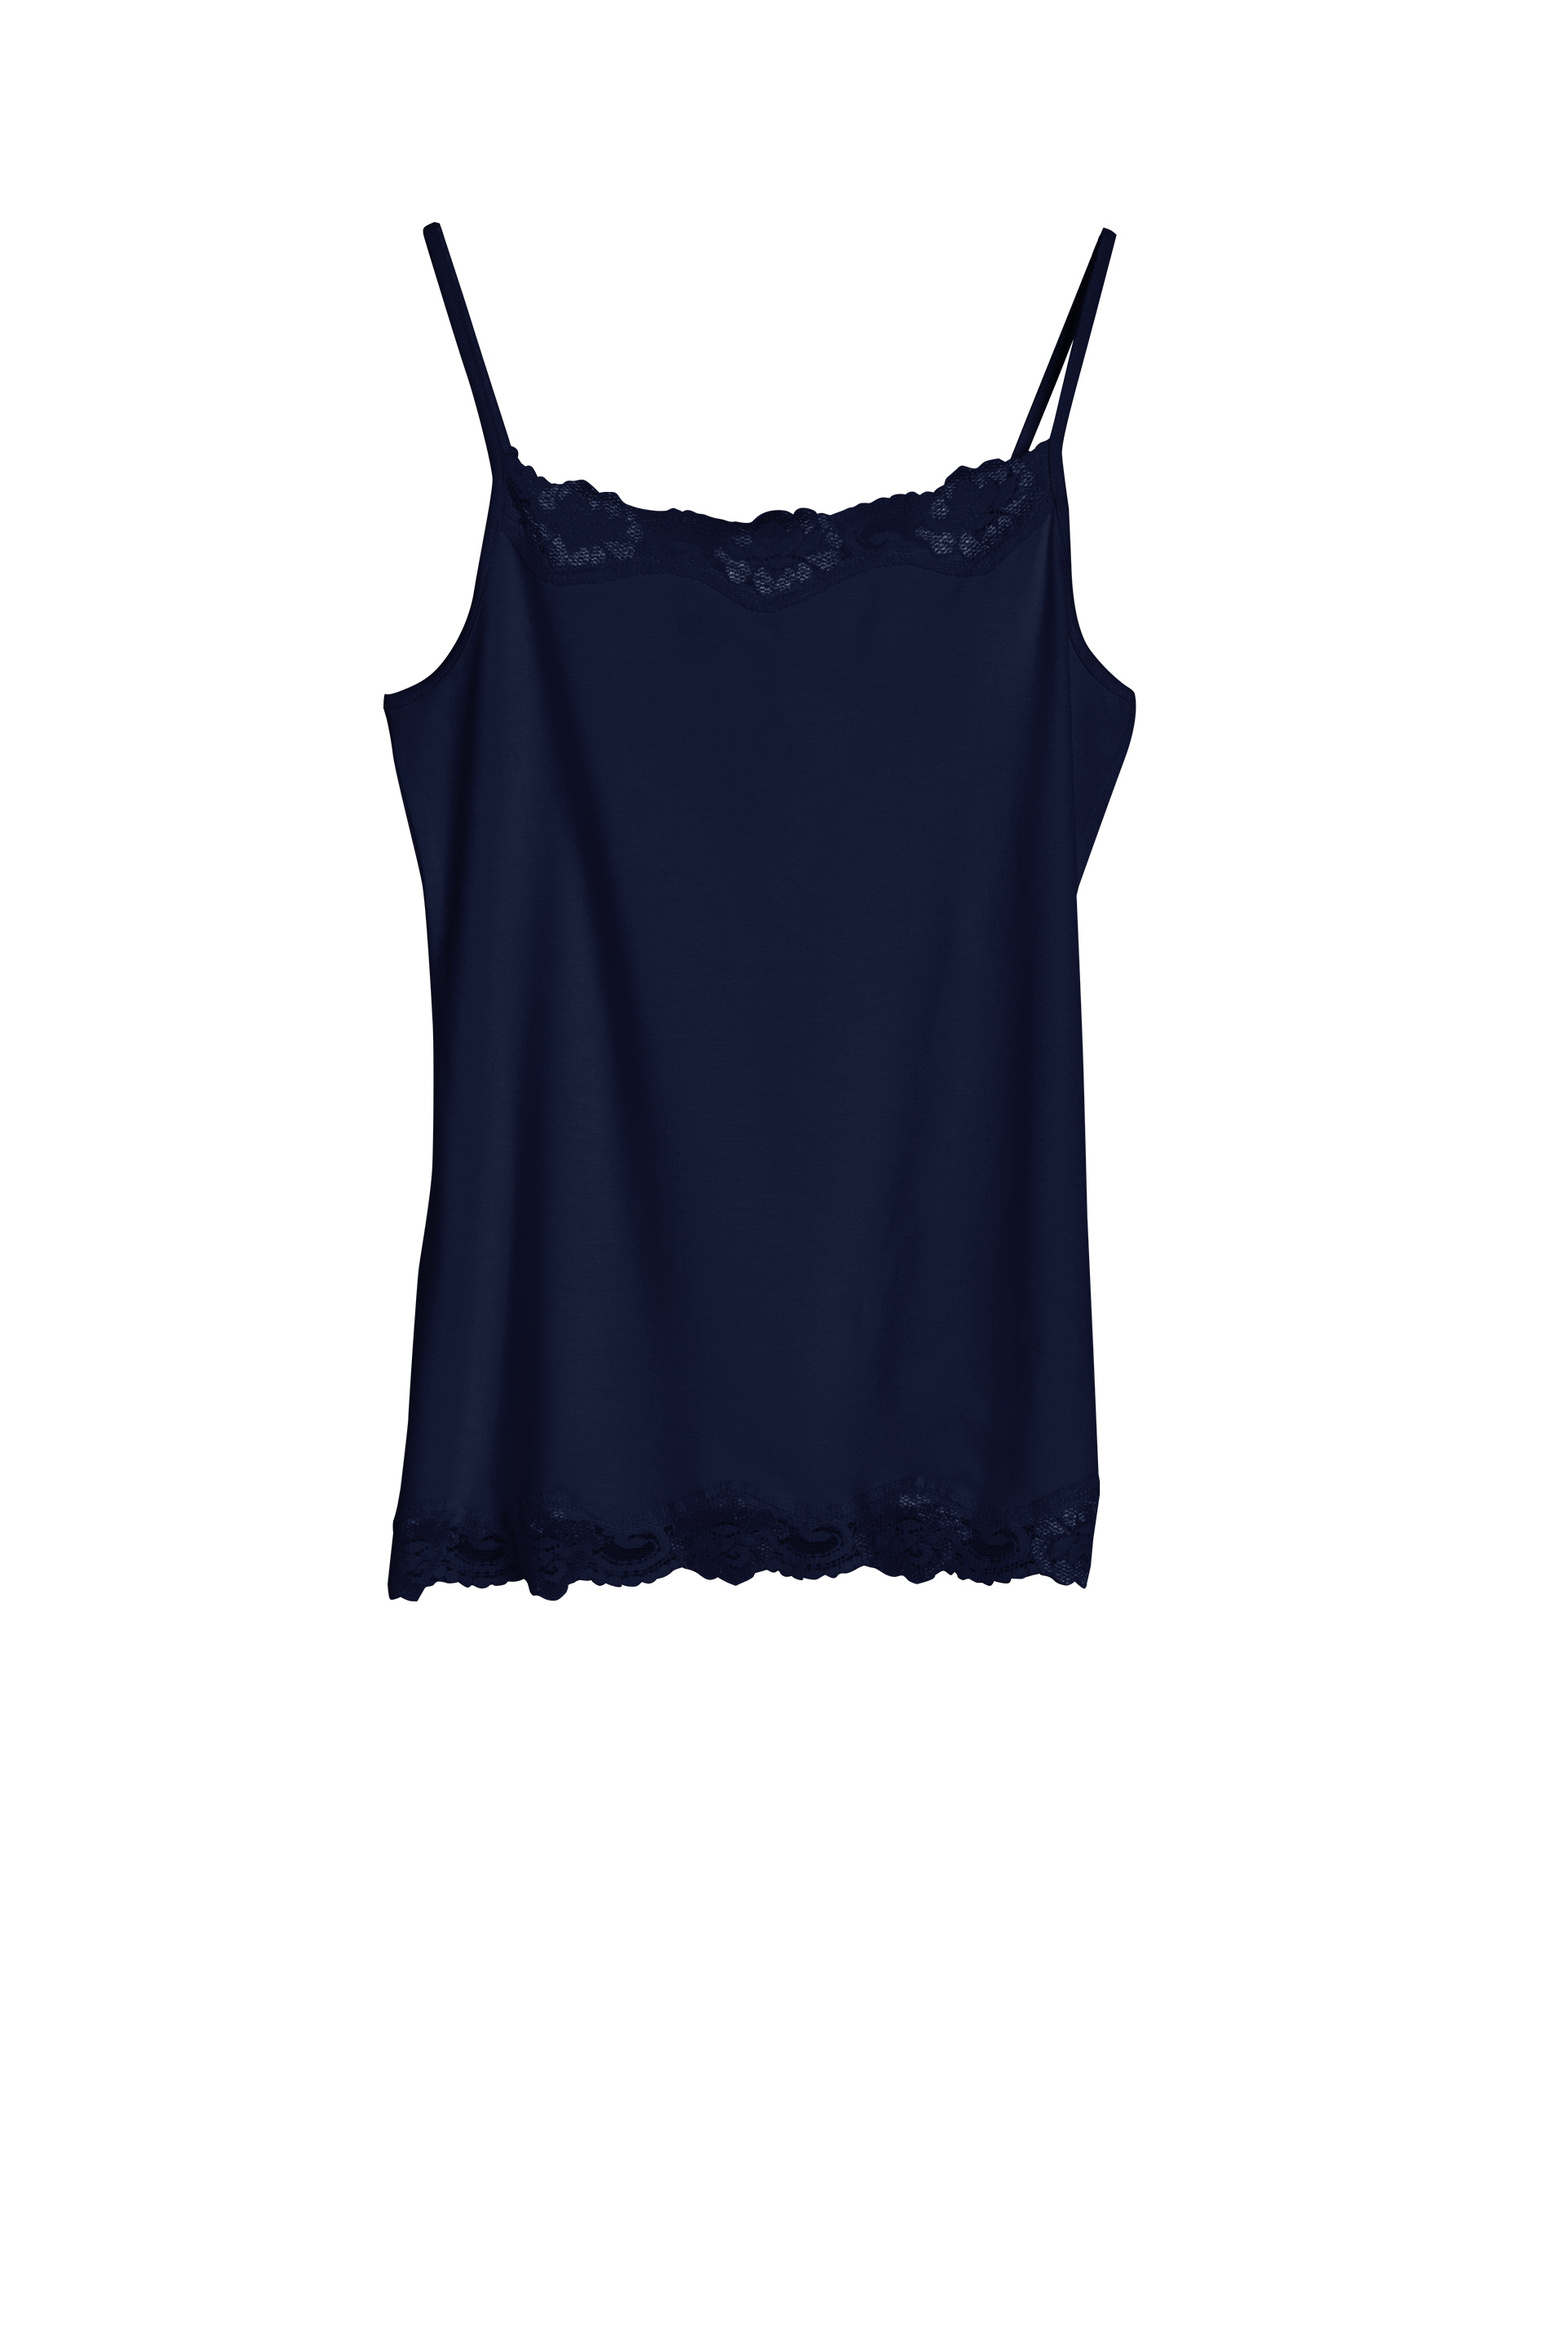 7200_lace_camisole_navy_new.jpg